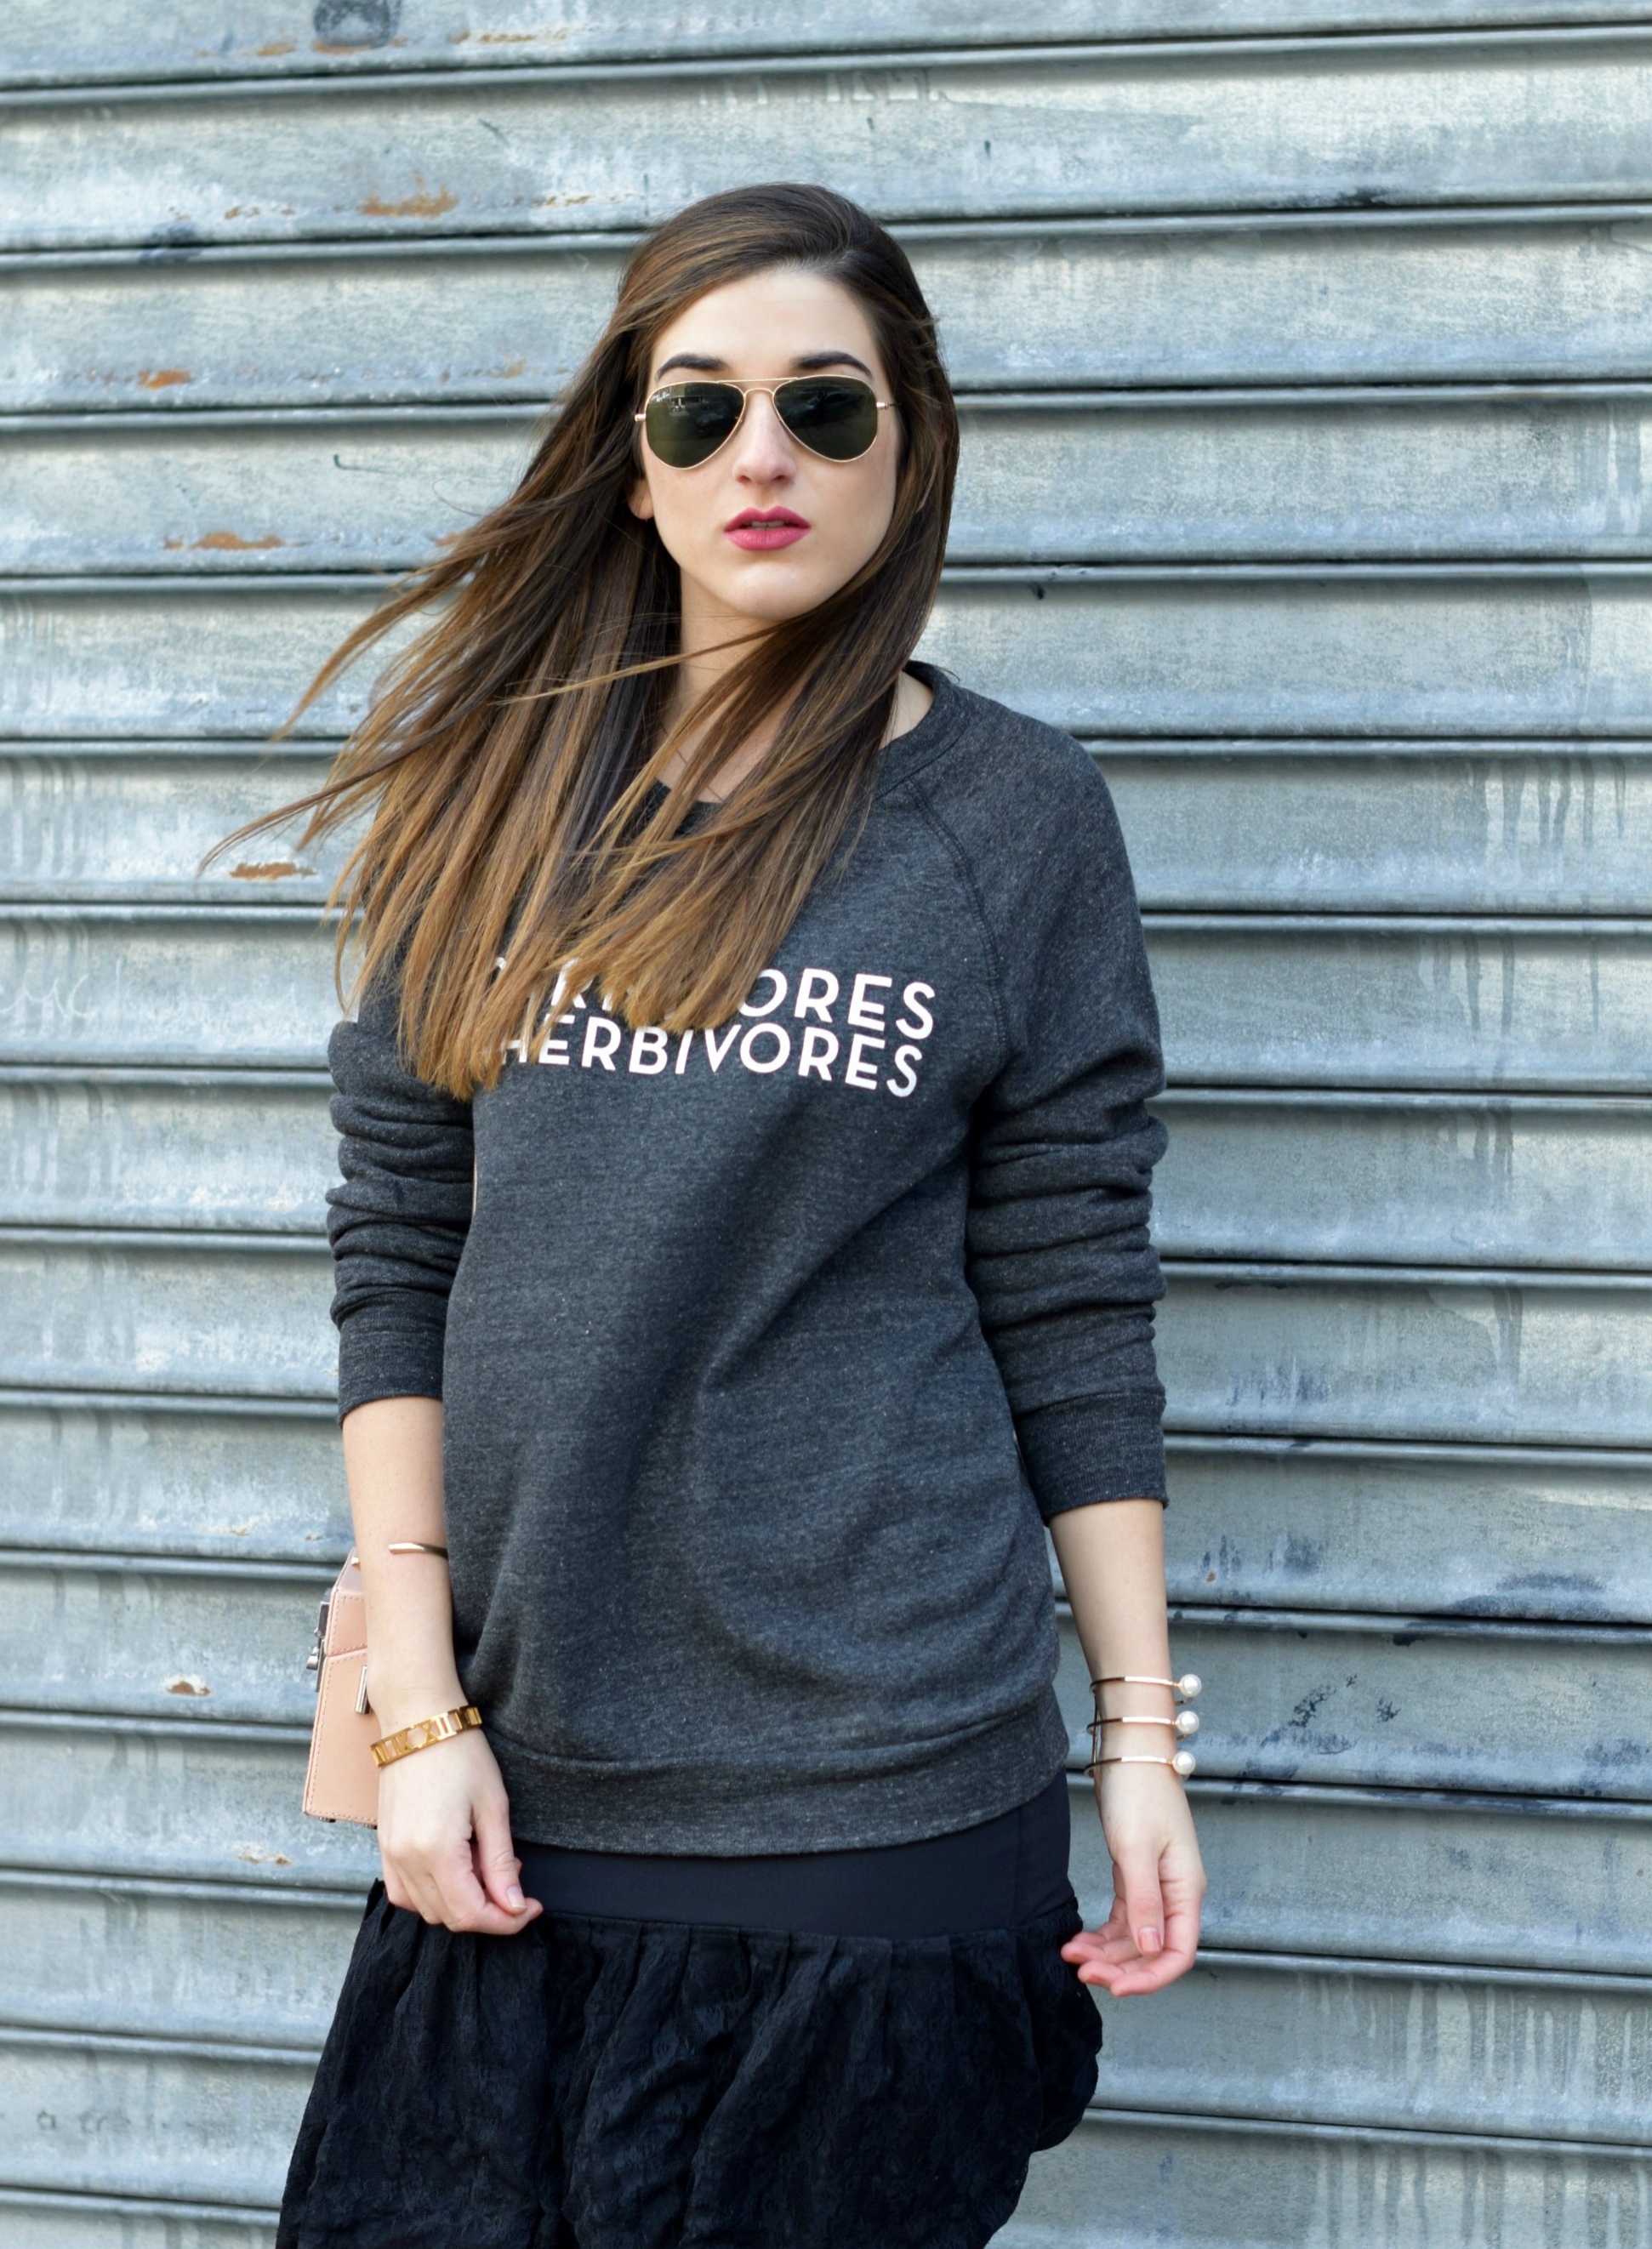 Carnivores For Herbivores Fauxgerty Louboutins & Love Fashion Blog Esther Santer NYC Street Style Blogger Animal Lover Cruelty Free Suede Vegan Leather RayBan Aviators Sunglasses Grey Sweatshirt Women Girl Lace Skirt OOTD Outfit USA Shop Hair Inspo.jpg